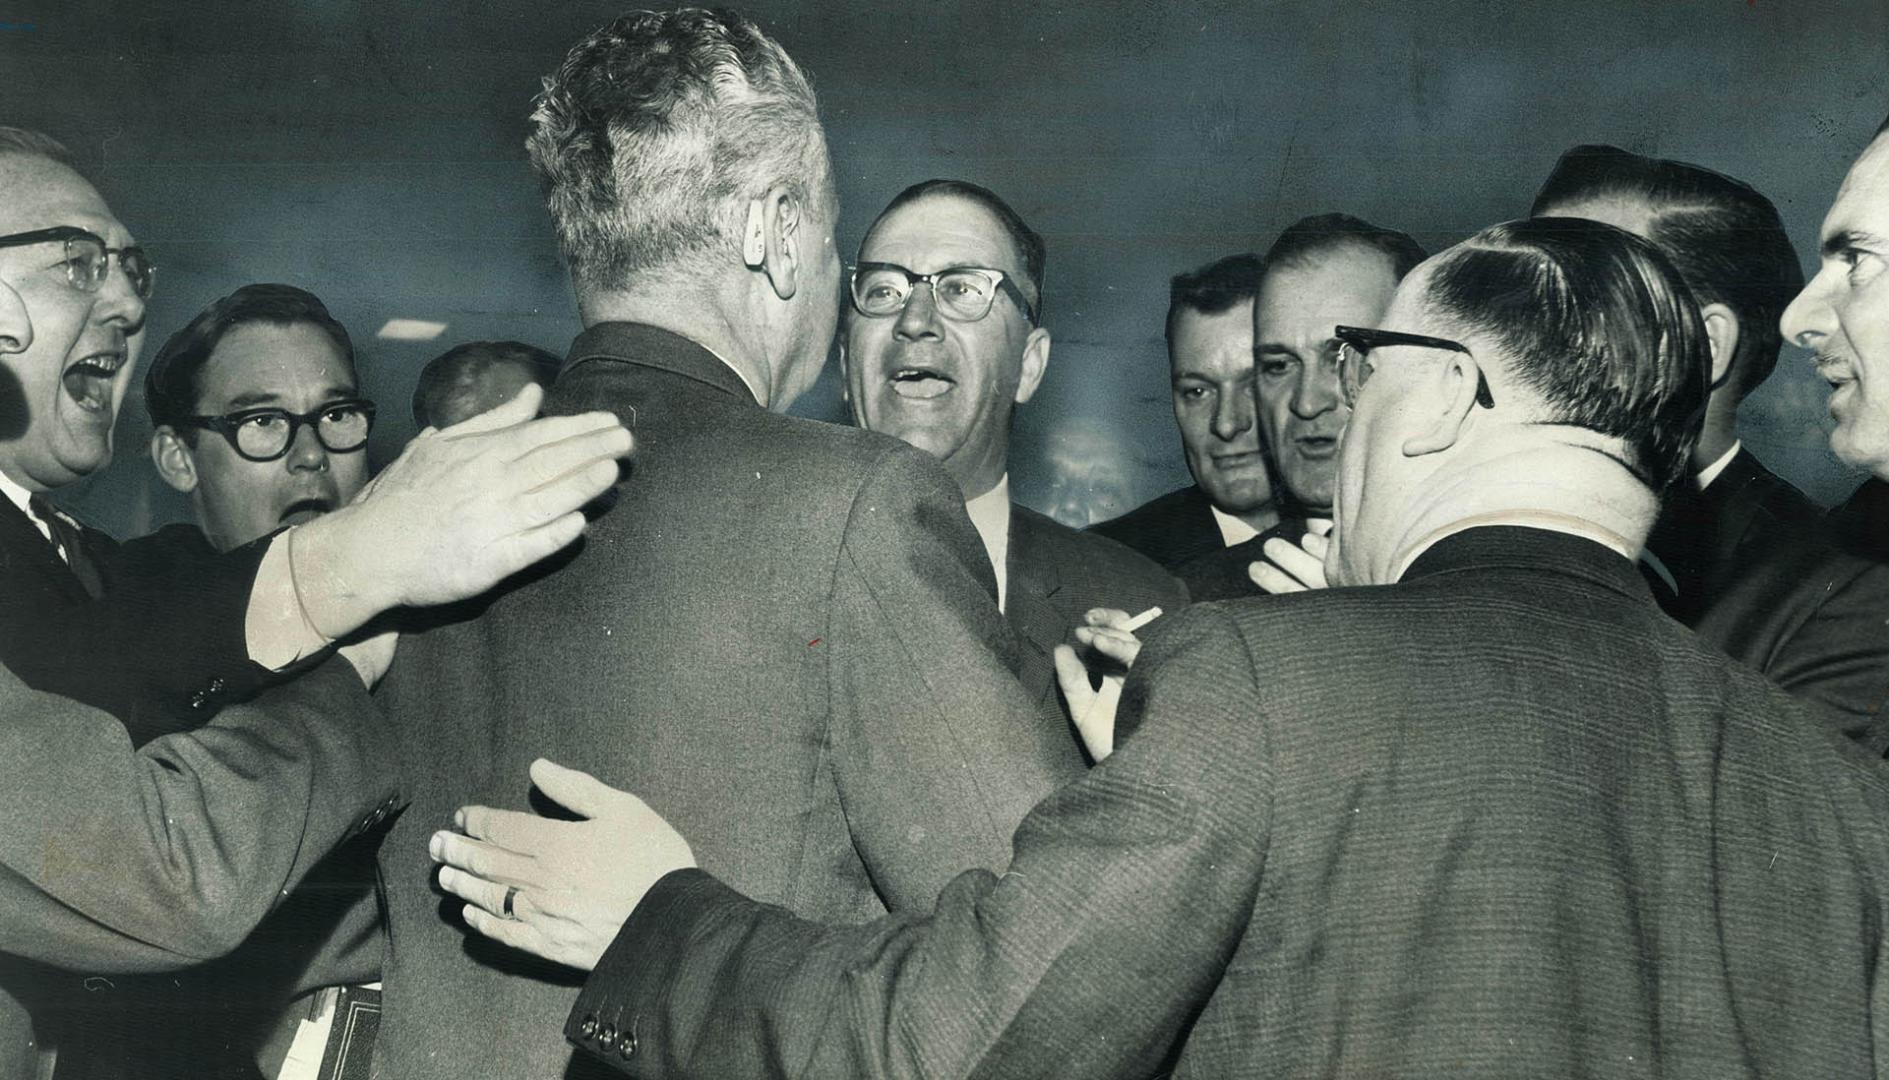 Back-Slapping Backbenchers give Prime Minister Diefenbaker a cheery welcome as he arrives at the House of Commons yesterday. However, proceedings were(...)